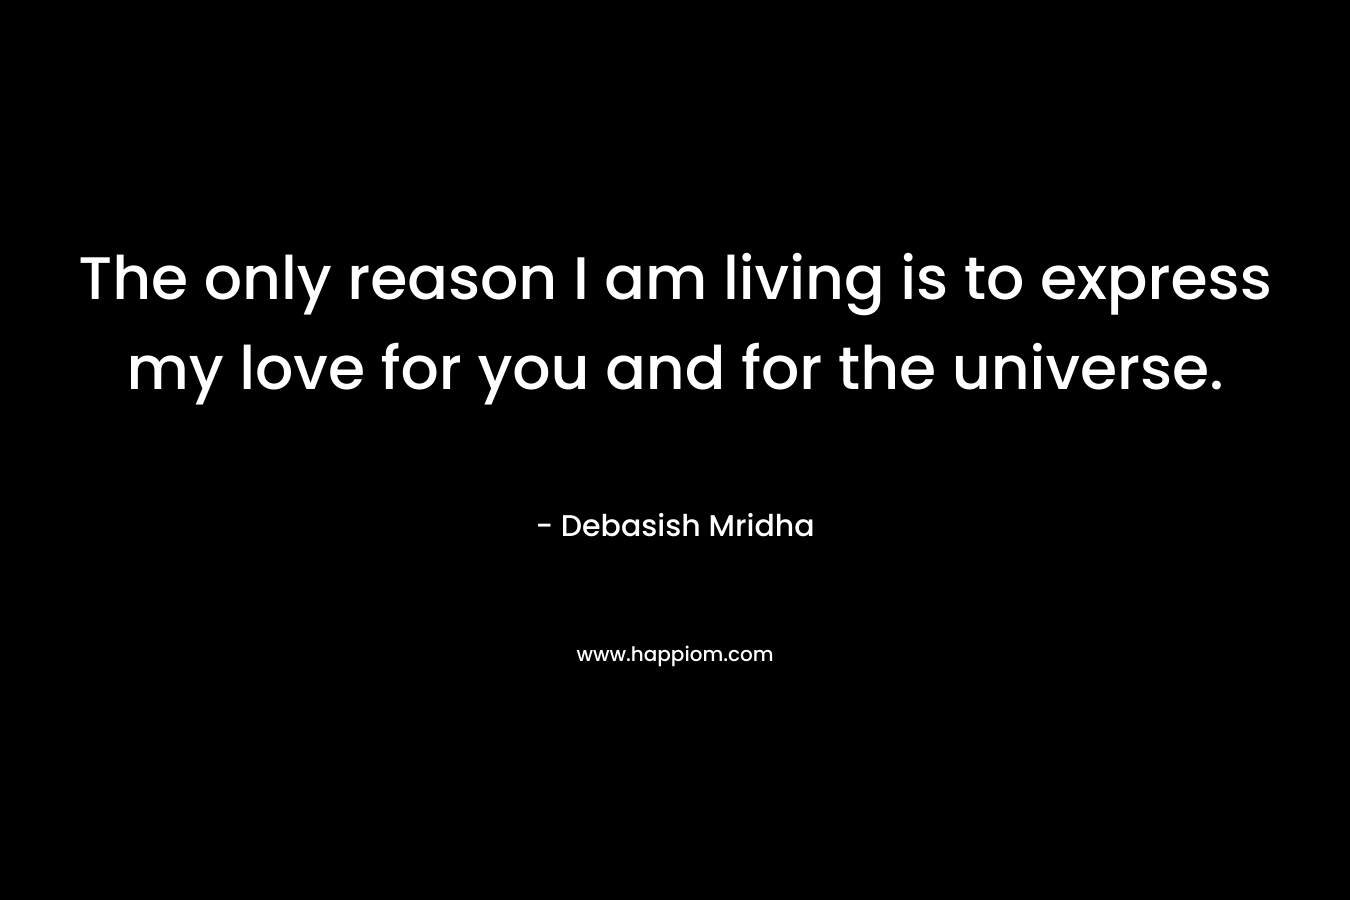 The only reason I am living is to express my love for you and for the universe.